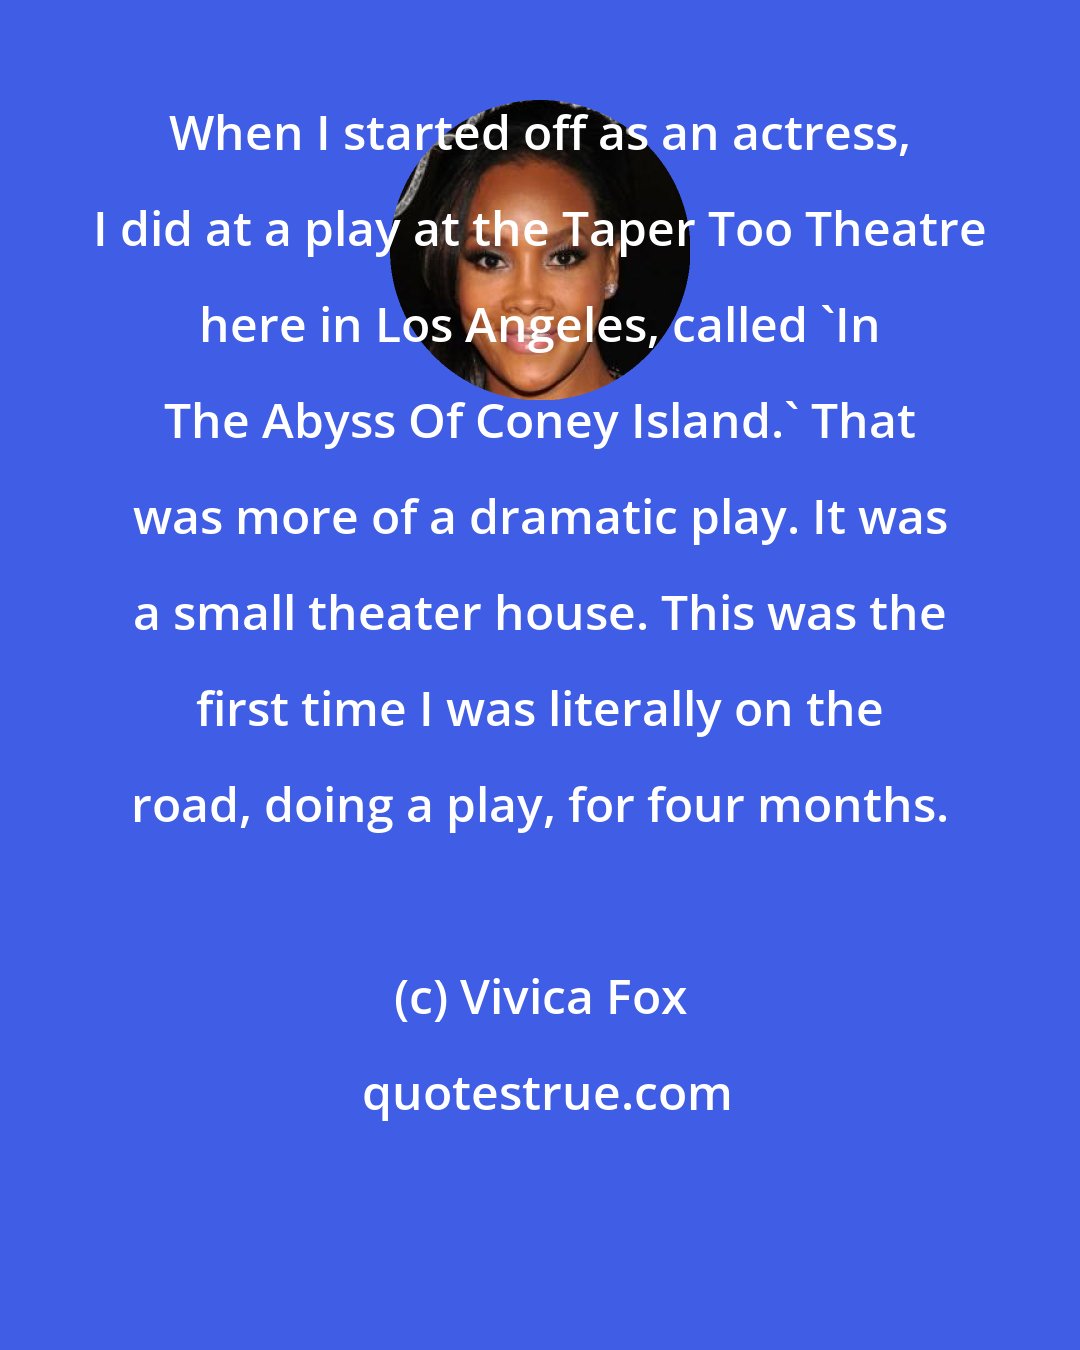 Vivica Fox: When I started off as an actress, I did at a play at the Taper Too Theatre here in Los Angeles, called 'In The Abyss Of Coney Island.' That was more of a dramatic play. It was a small theater house. This was the first time I was literally on the road, doing a play, for four months.